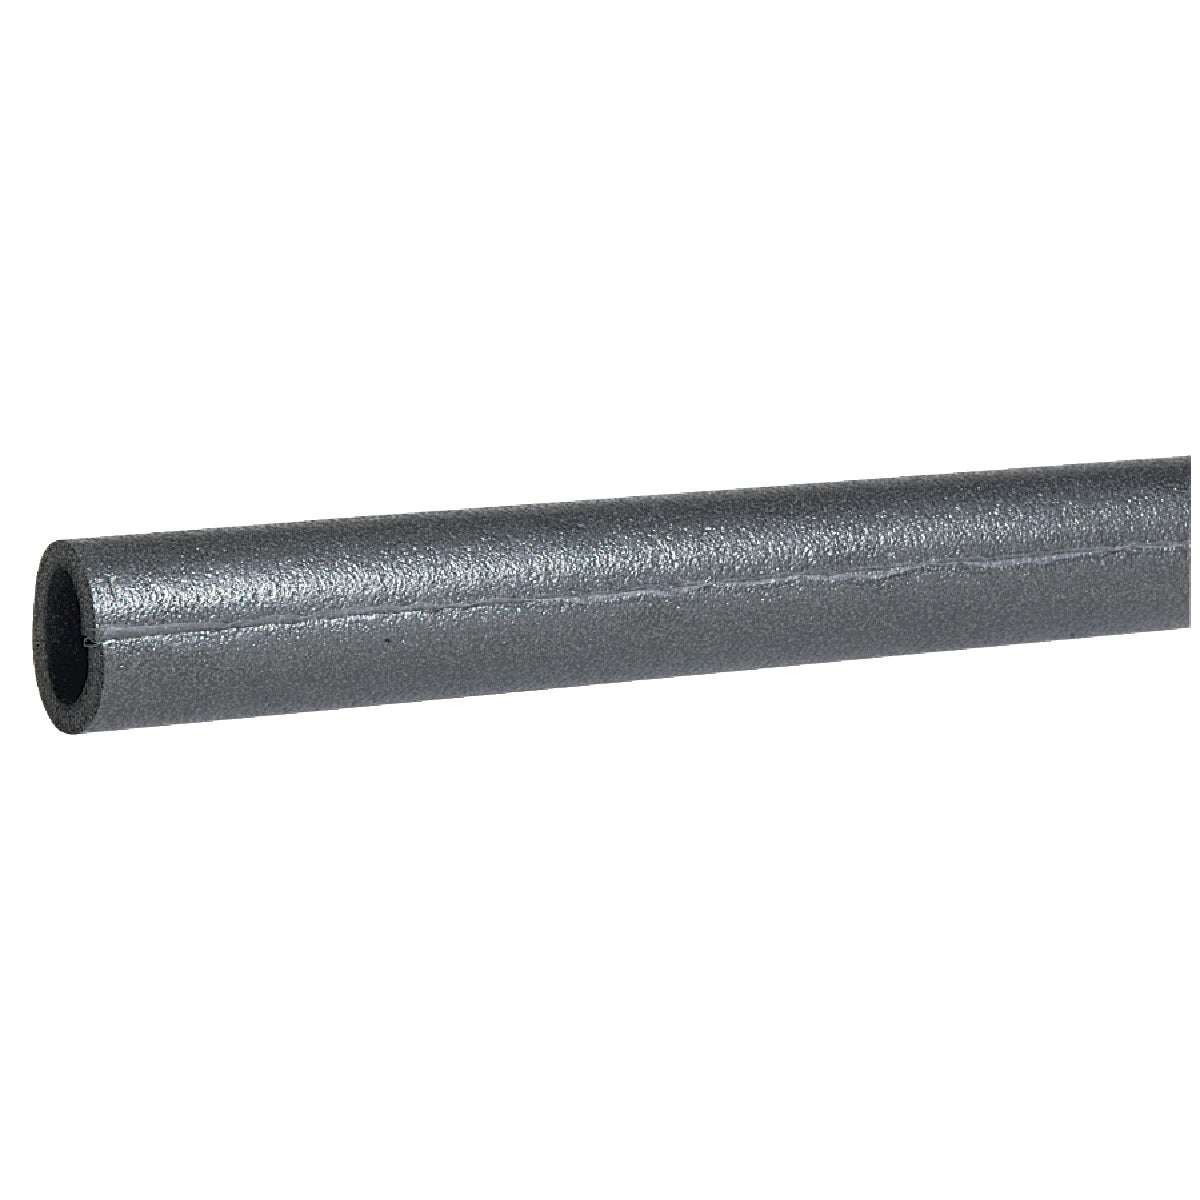 Tundra 1/2 In. Wall Self-Sealing Polyethylene Pipe Insulation Wrap, 1 In. x 6 Ft. Fits Pipe Size 1 In. Copper / 3/4 In. Iron